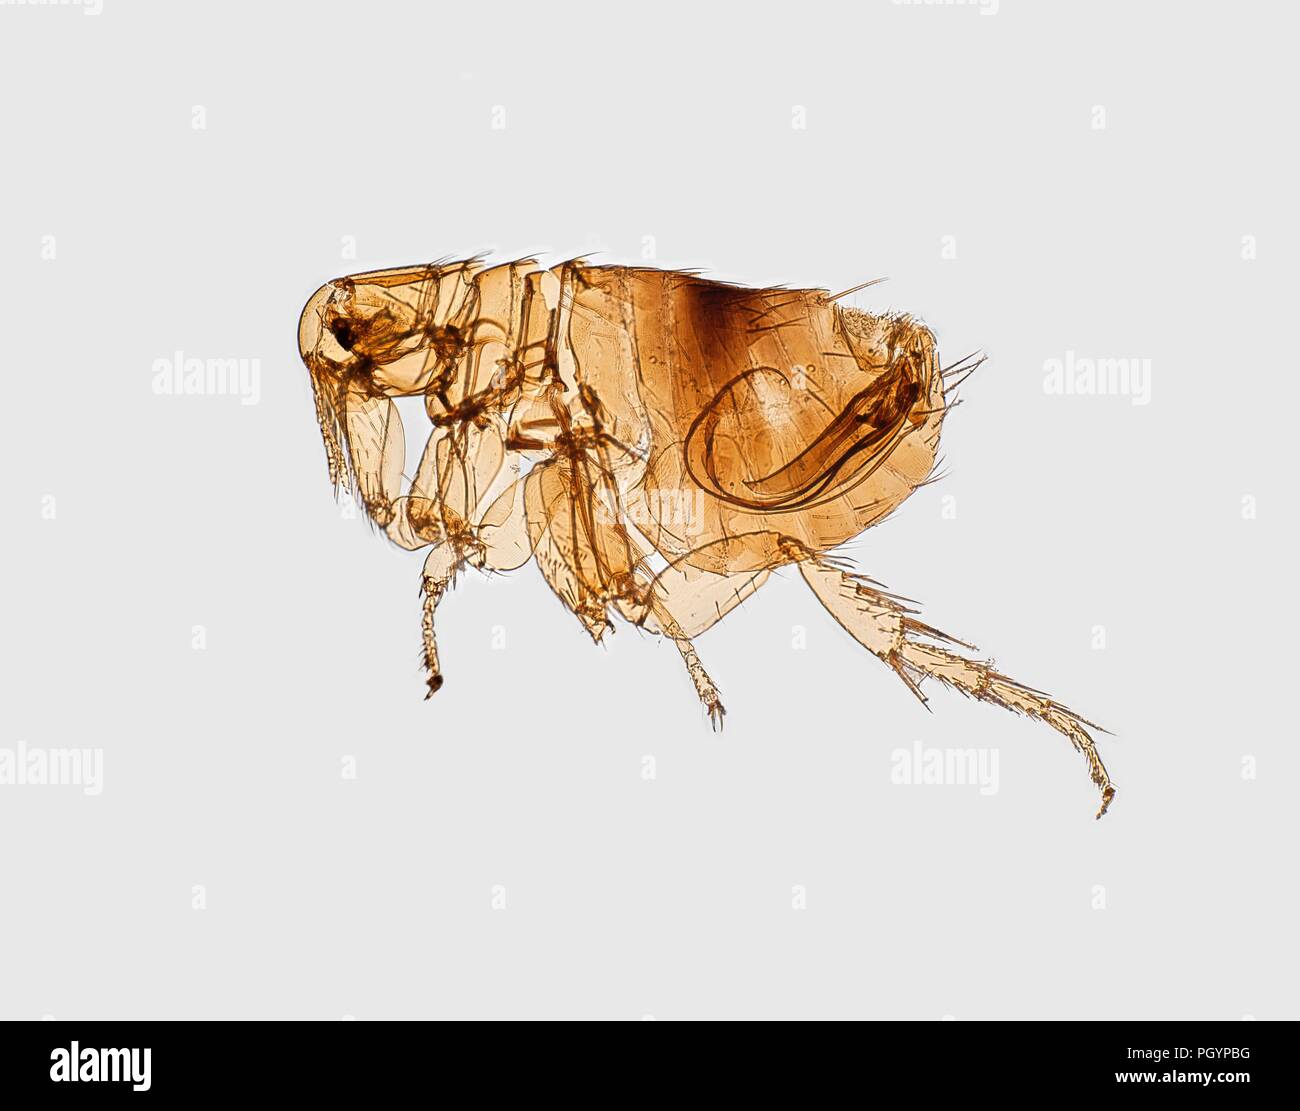 Morphological characteristic of a flea depicted in the digitally-colorized scanning electron microscopic (SEM) image, 2017. Image courtesy Centers for Disease Control (CDC) / Ken Gage. () Stock Photo